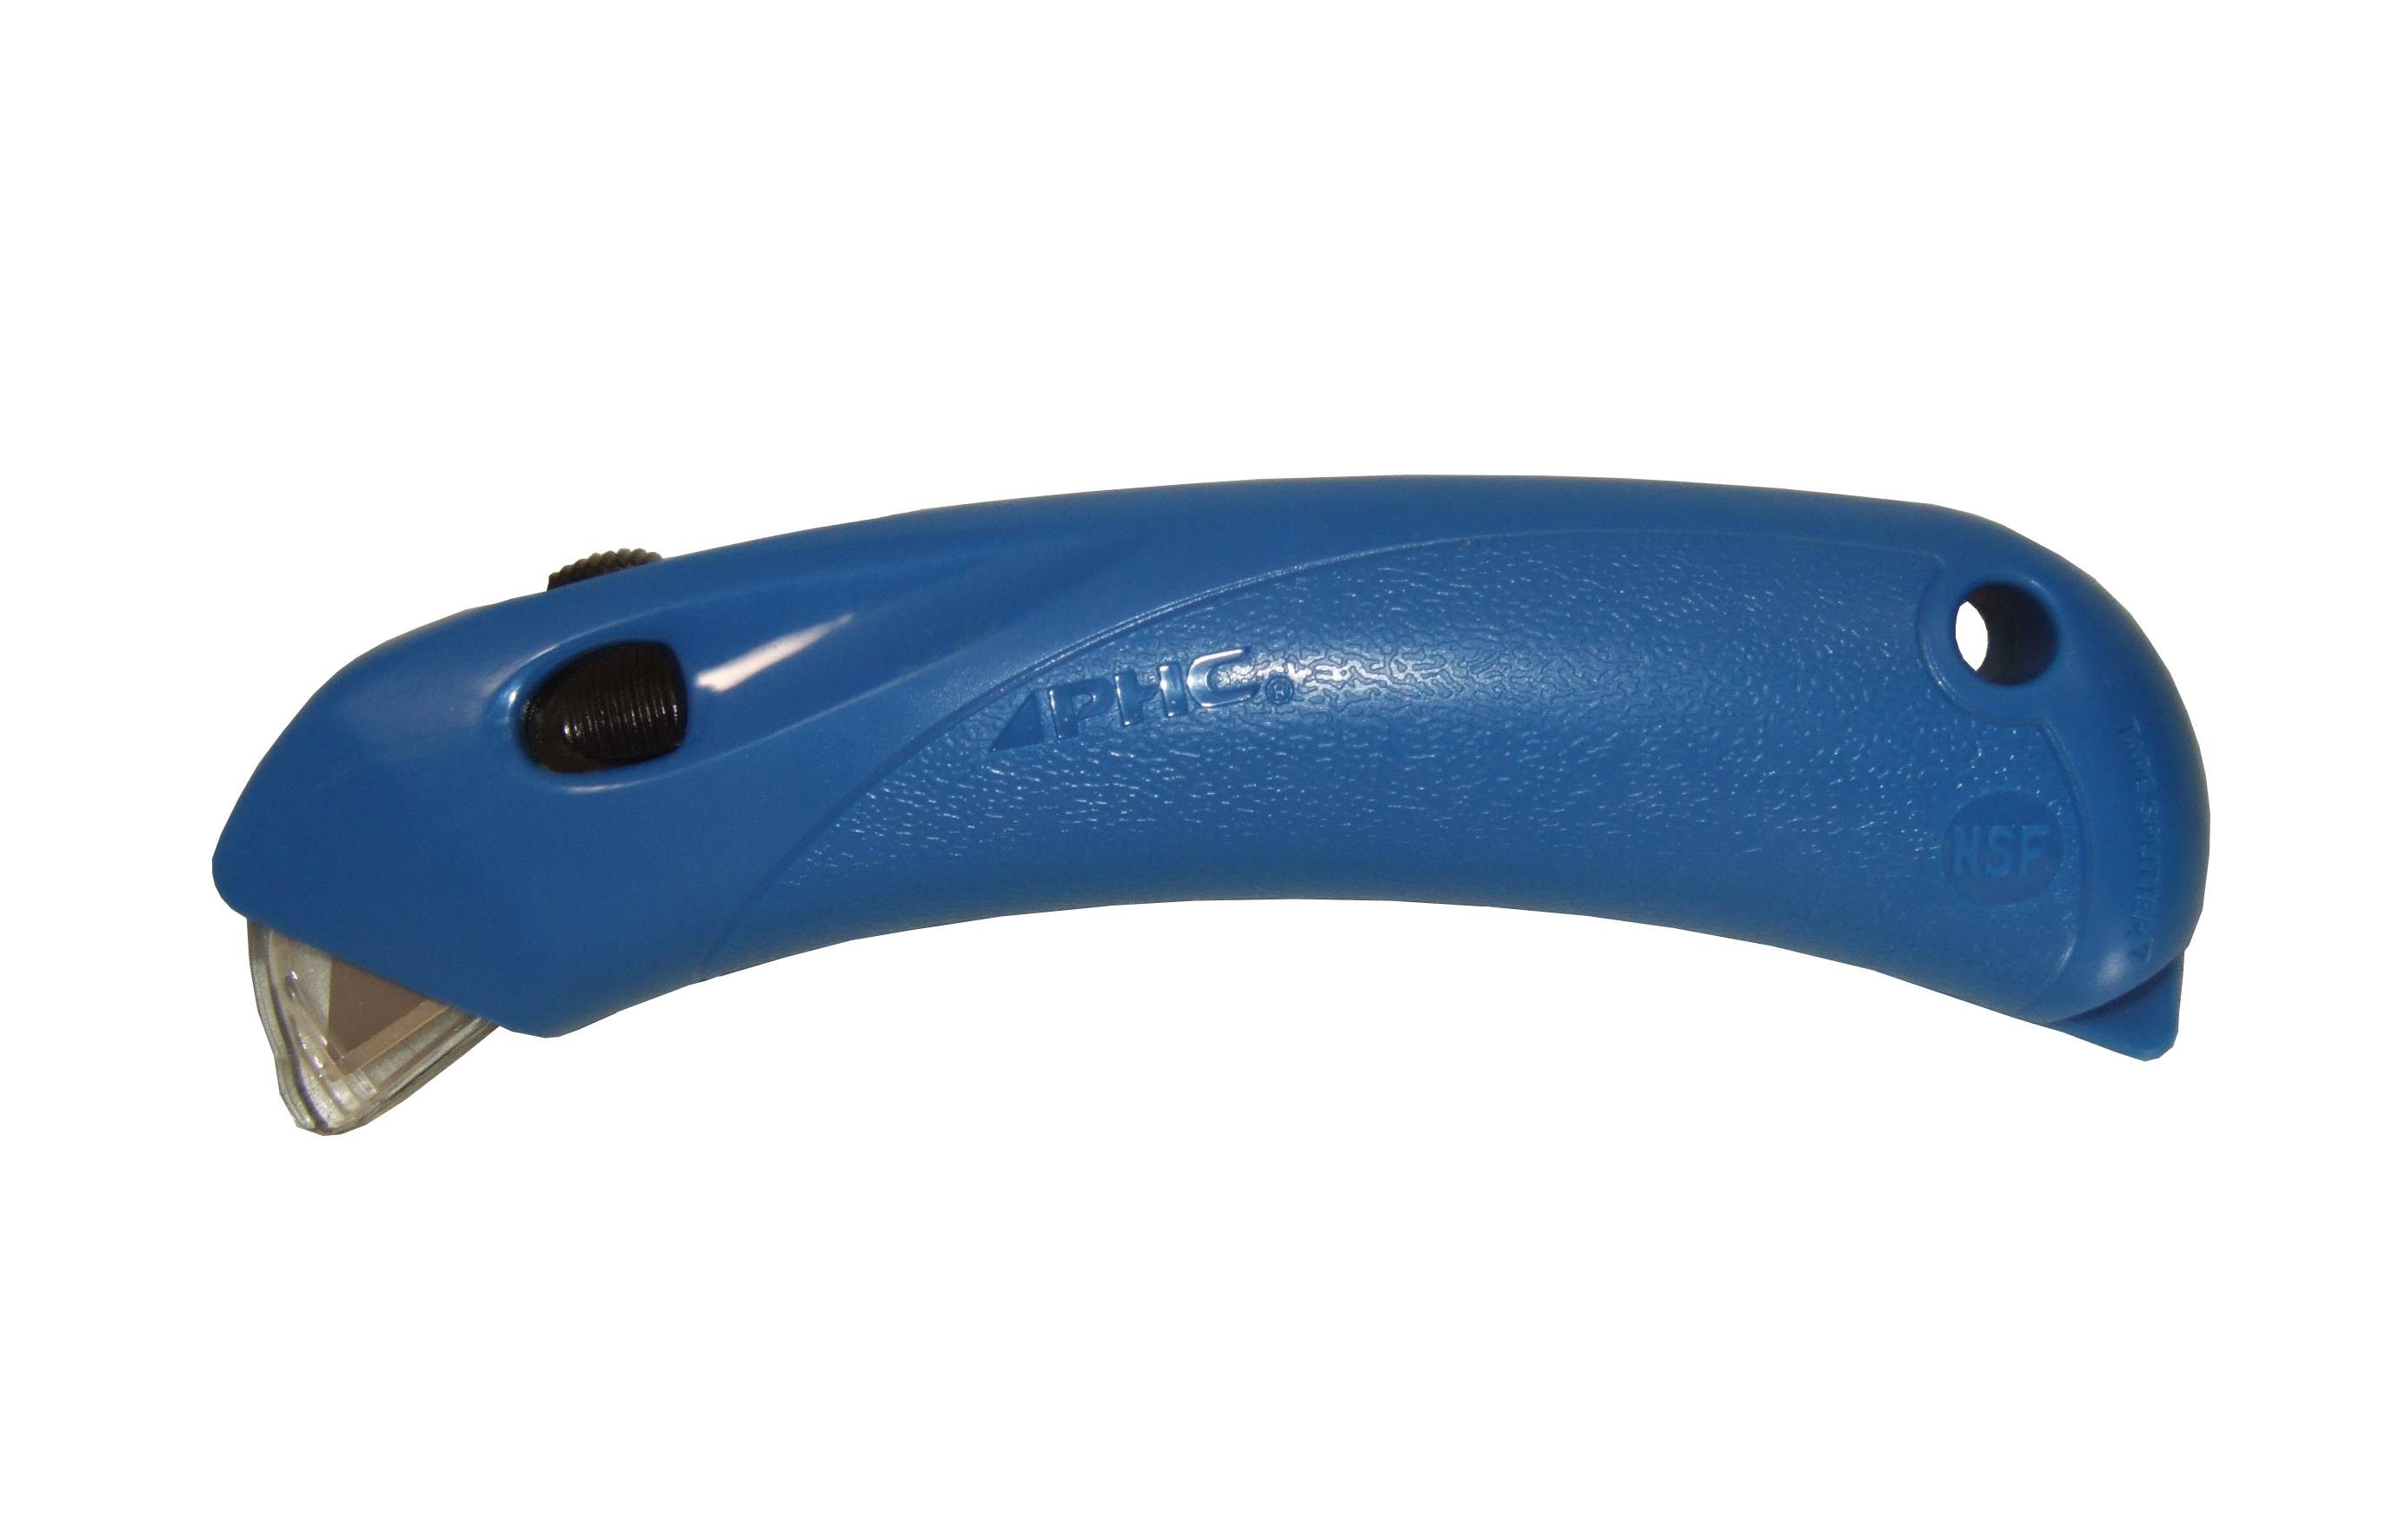 Retractable Safety Cutter - Blue - Stainless Steel Blade